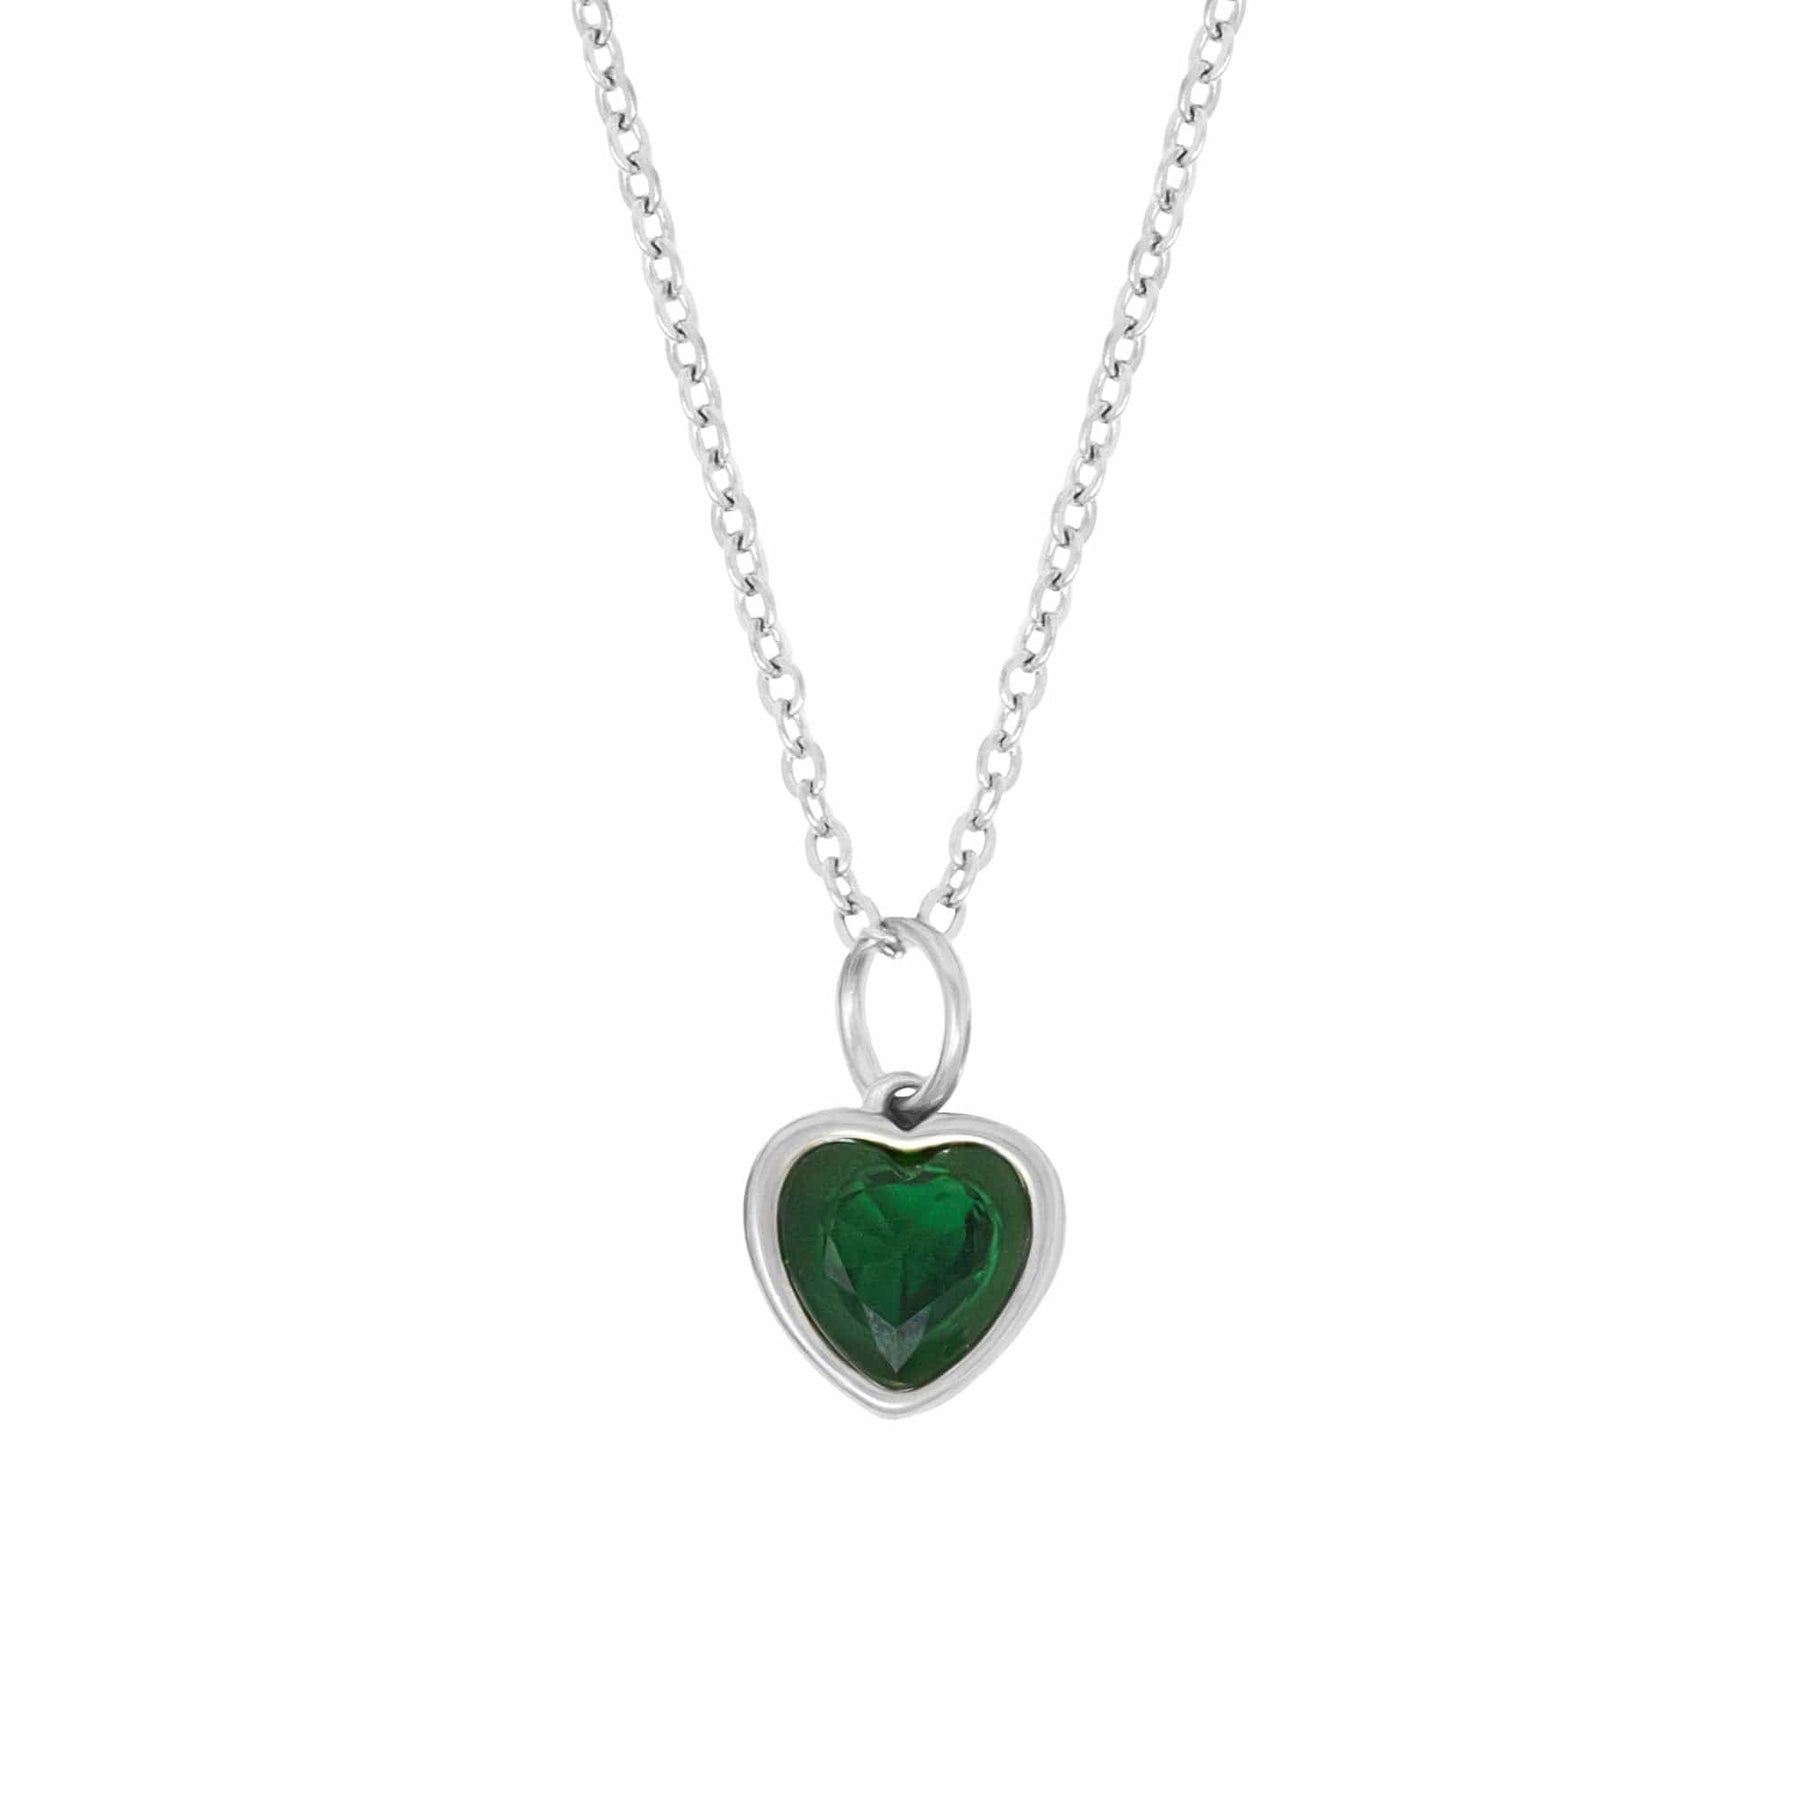 BohoMoon Stainless Steel Love Heart Birthstone Necklace Silver / May